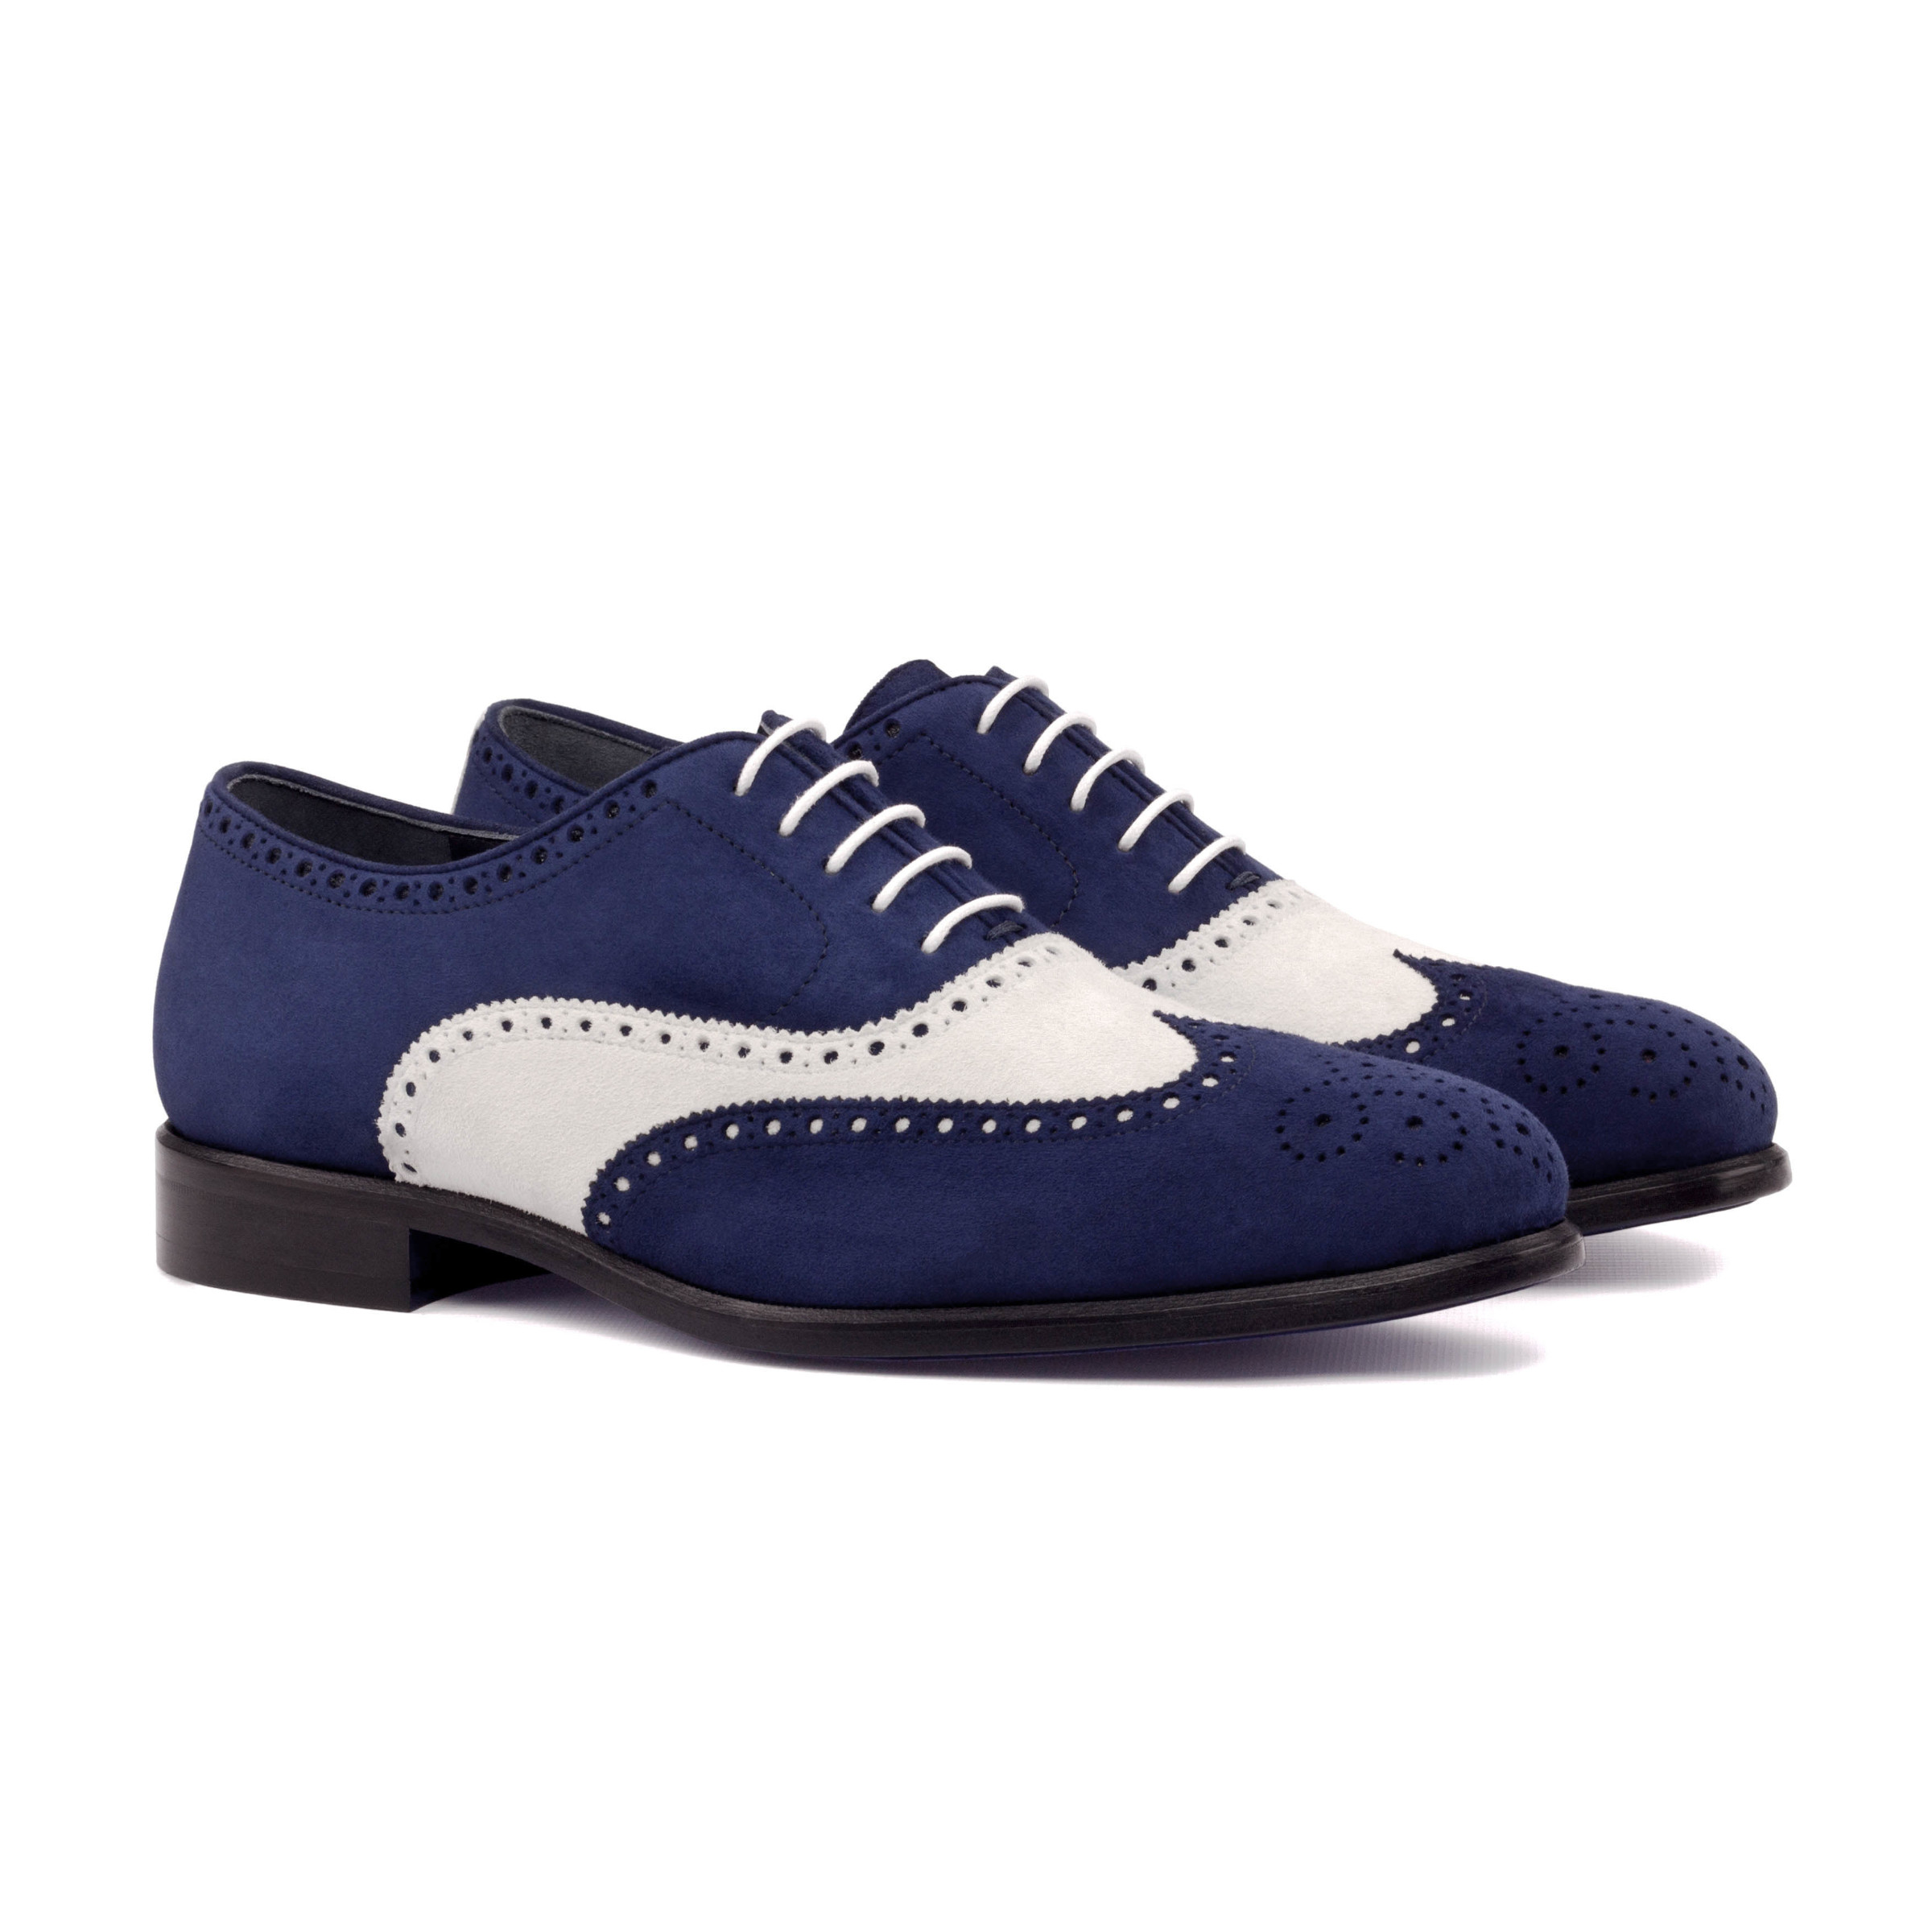 Kid leather blue suede dress shoes